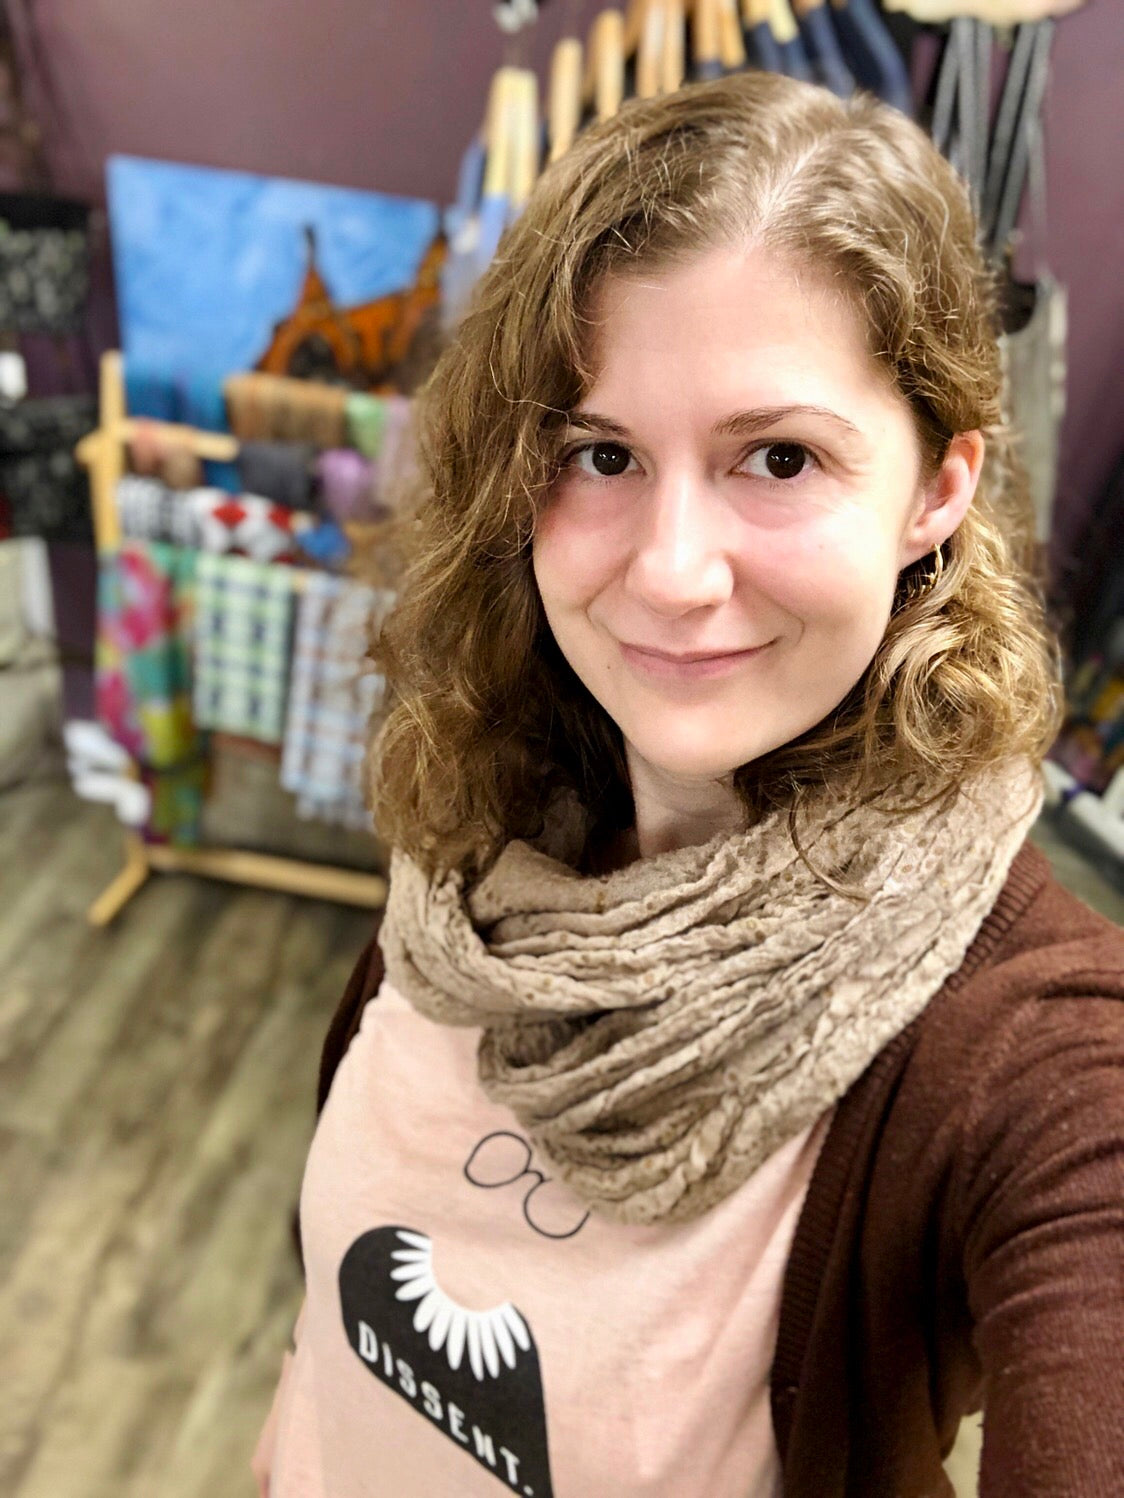 Image is of shop owner, Sumner. Sumner has brown eyes and honey-colored curly hair. She wears a pink t-shirt and a brown cardigan.